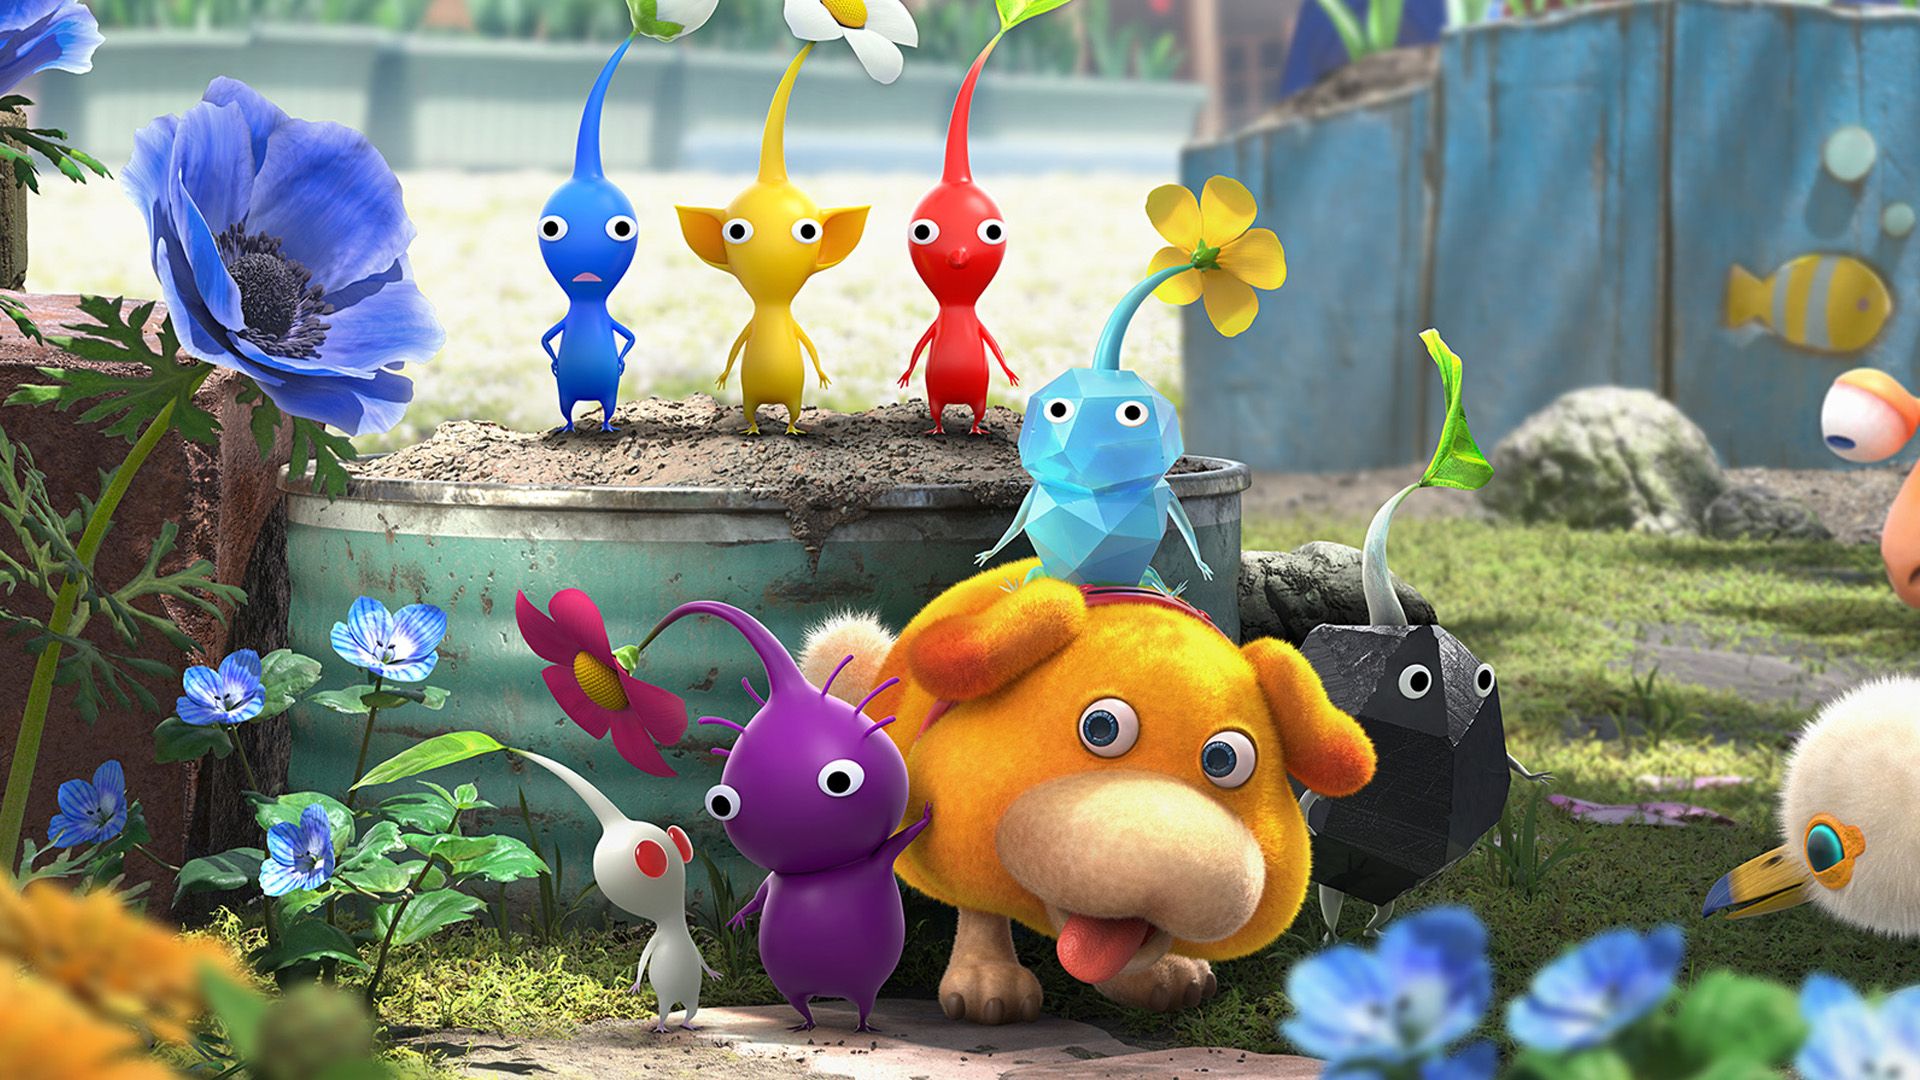 Review: Pikmin 4 (Nintendo Switch) – Digitally Downloaded